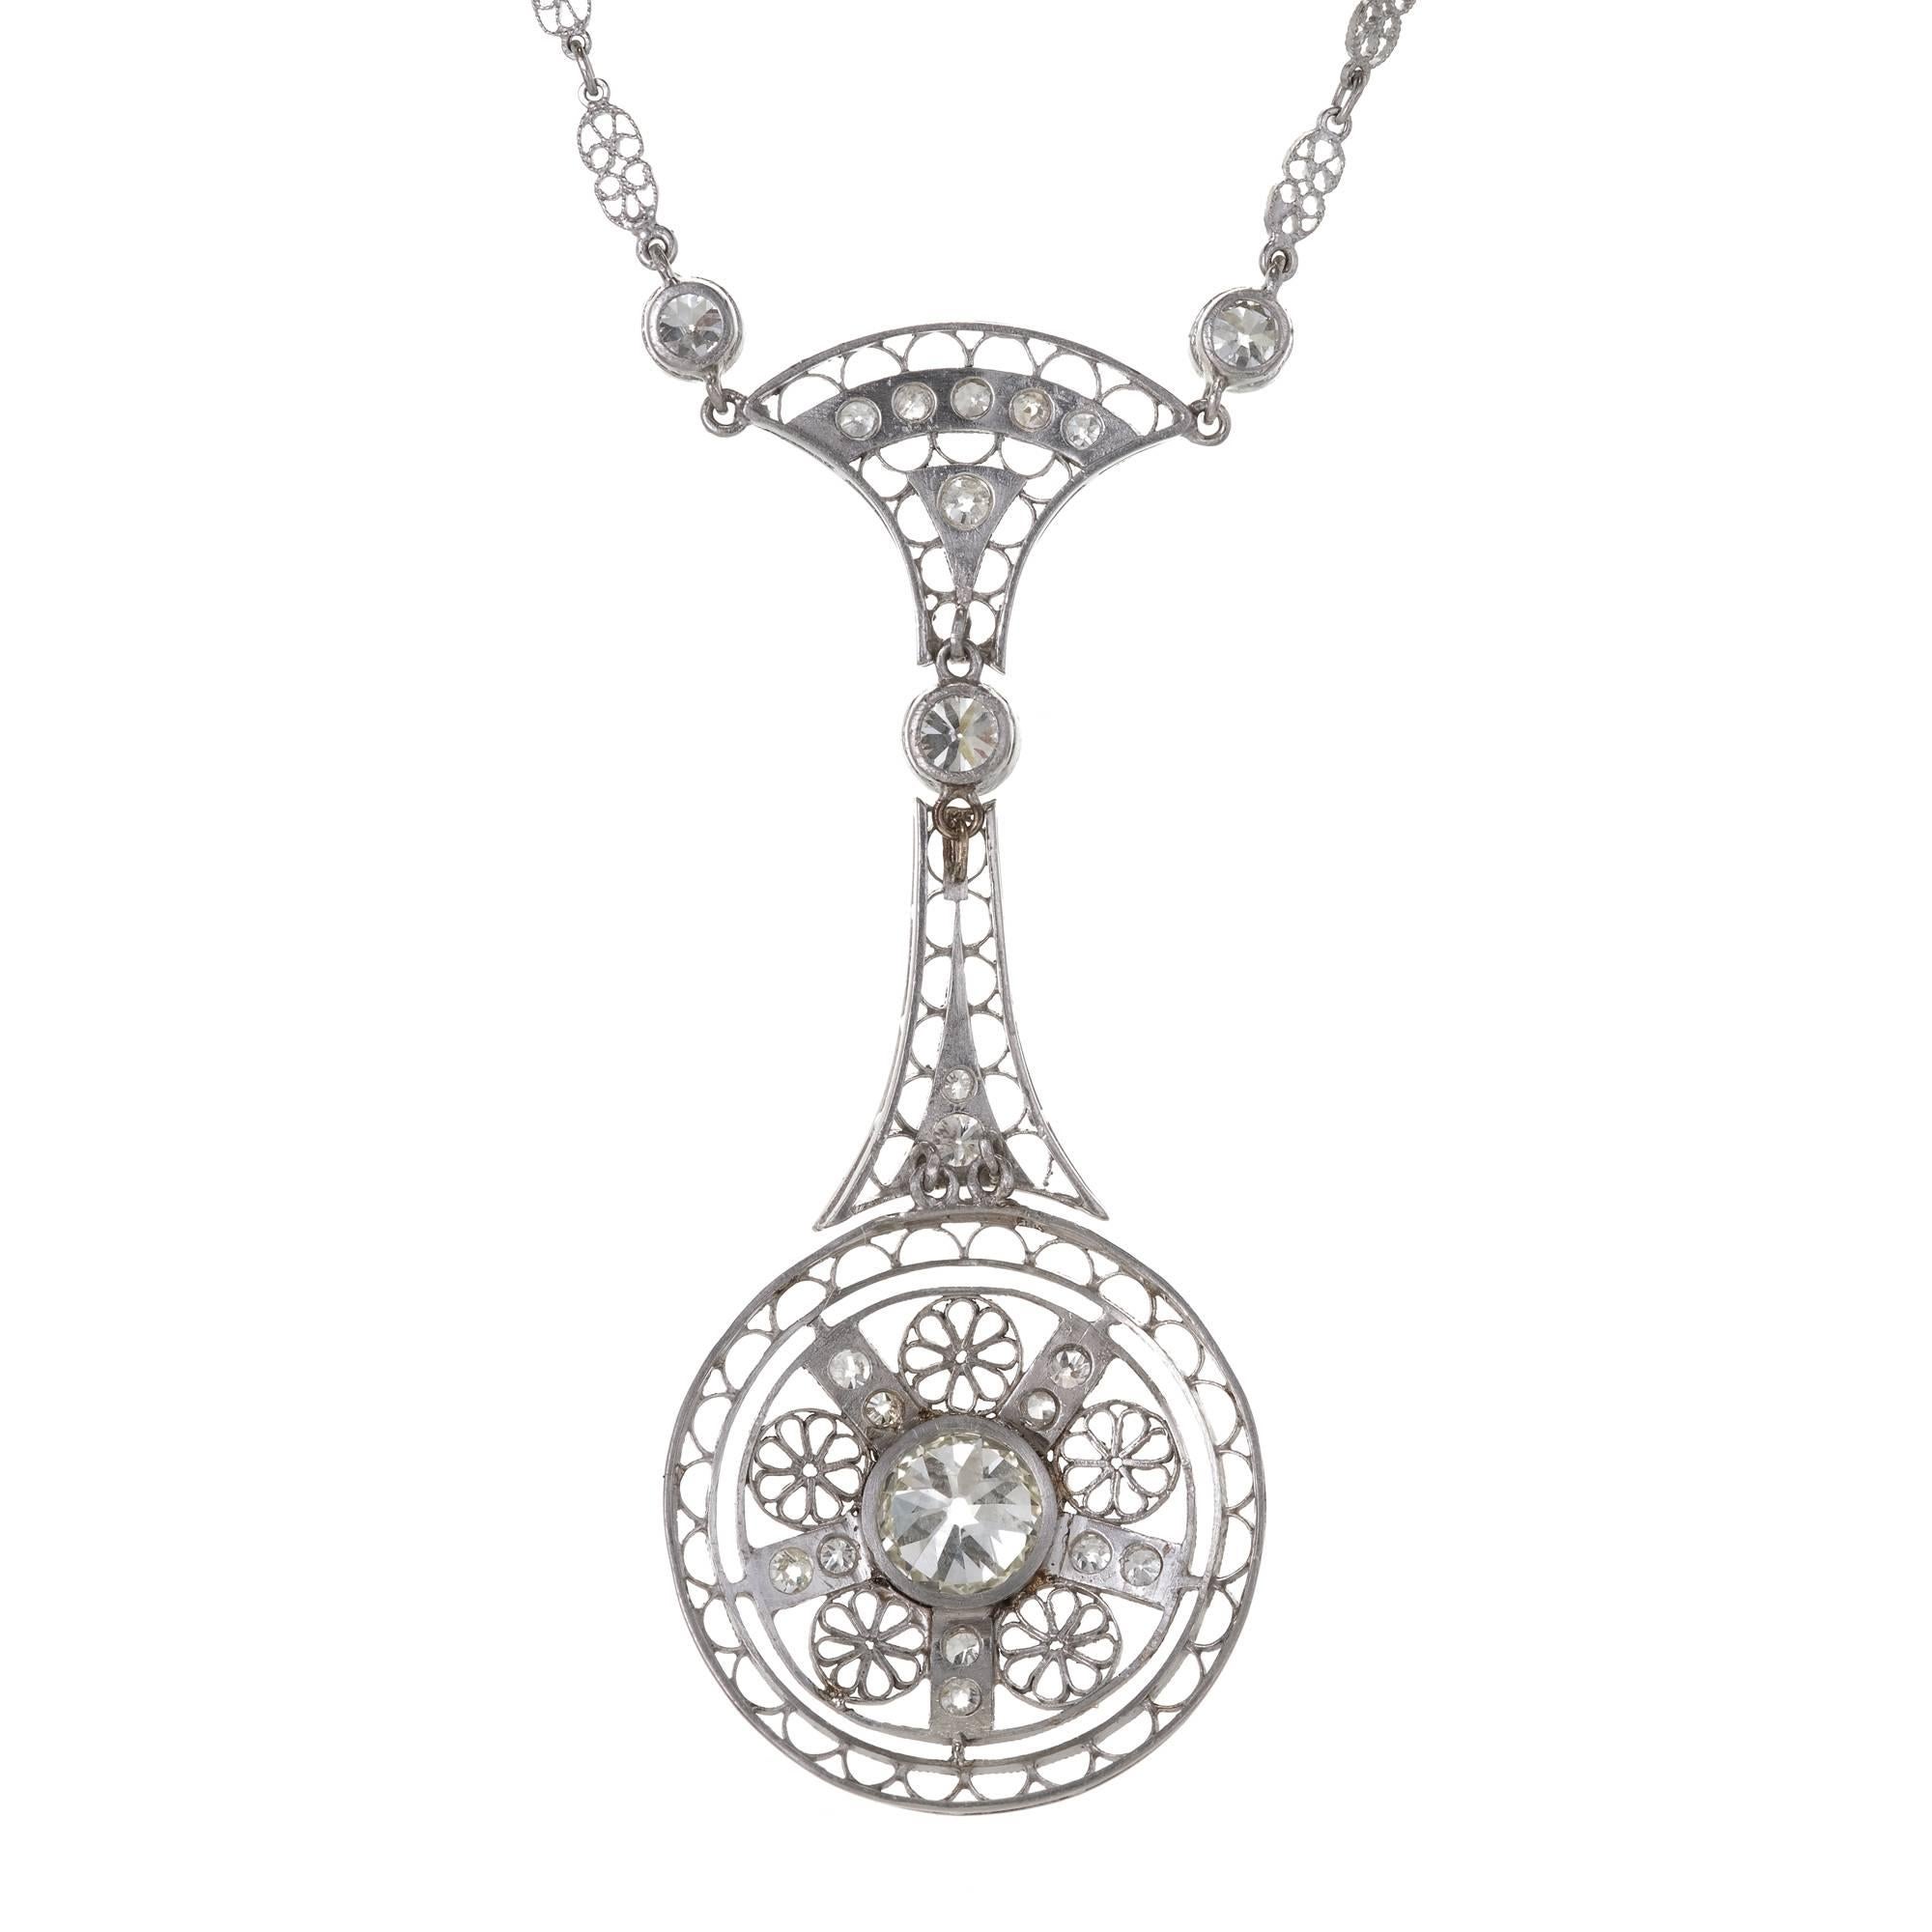 EGL certified Victorian 1900 handmade filigree drop pendant and handmade filigree chain. The diamonds are white old cut and sparkly. All original. 

1 Center diamond EGL certified .99ct, I, VS1 old European cut, excellent sparkle and brilliance,